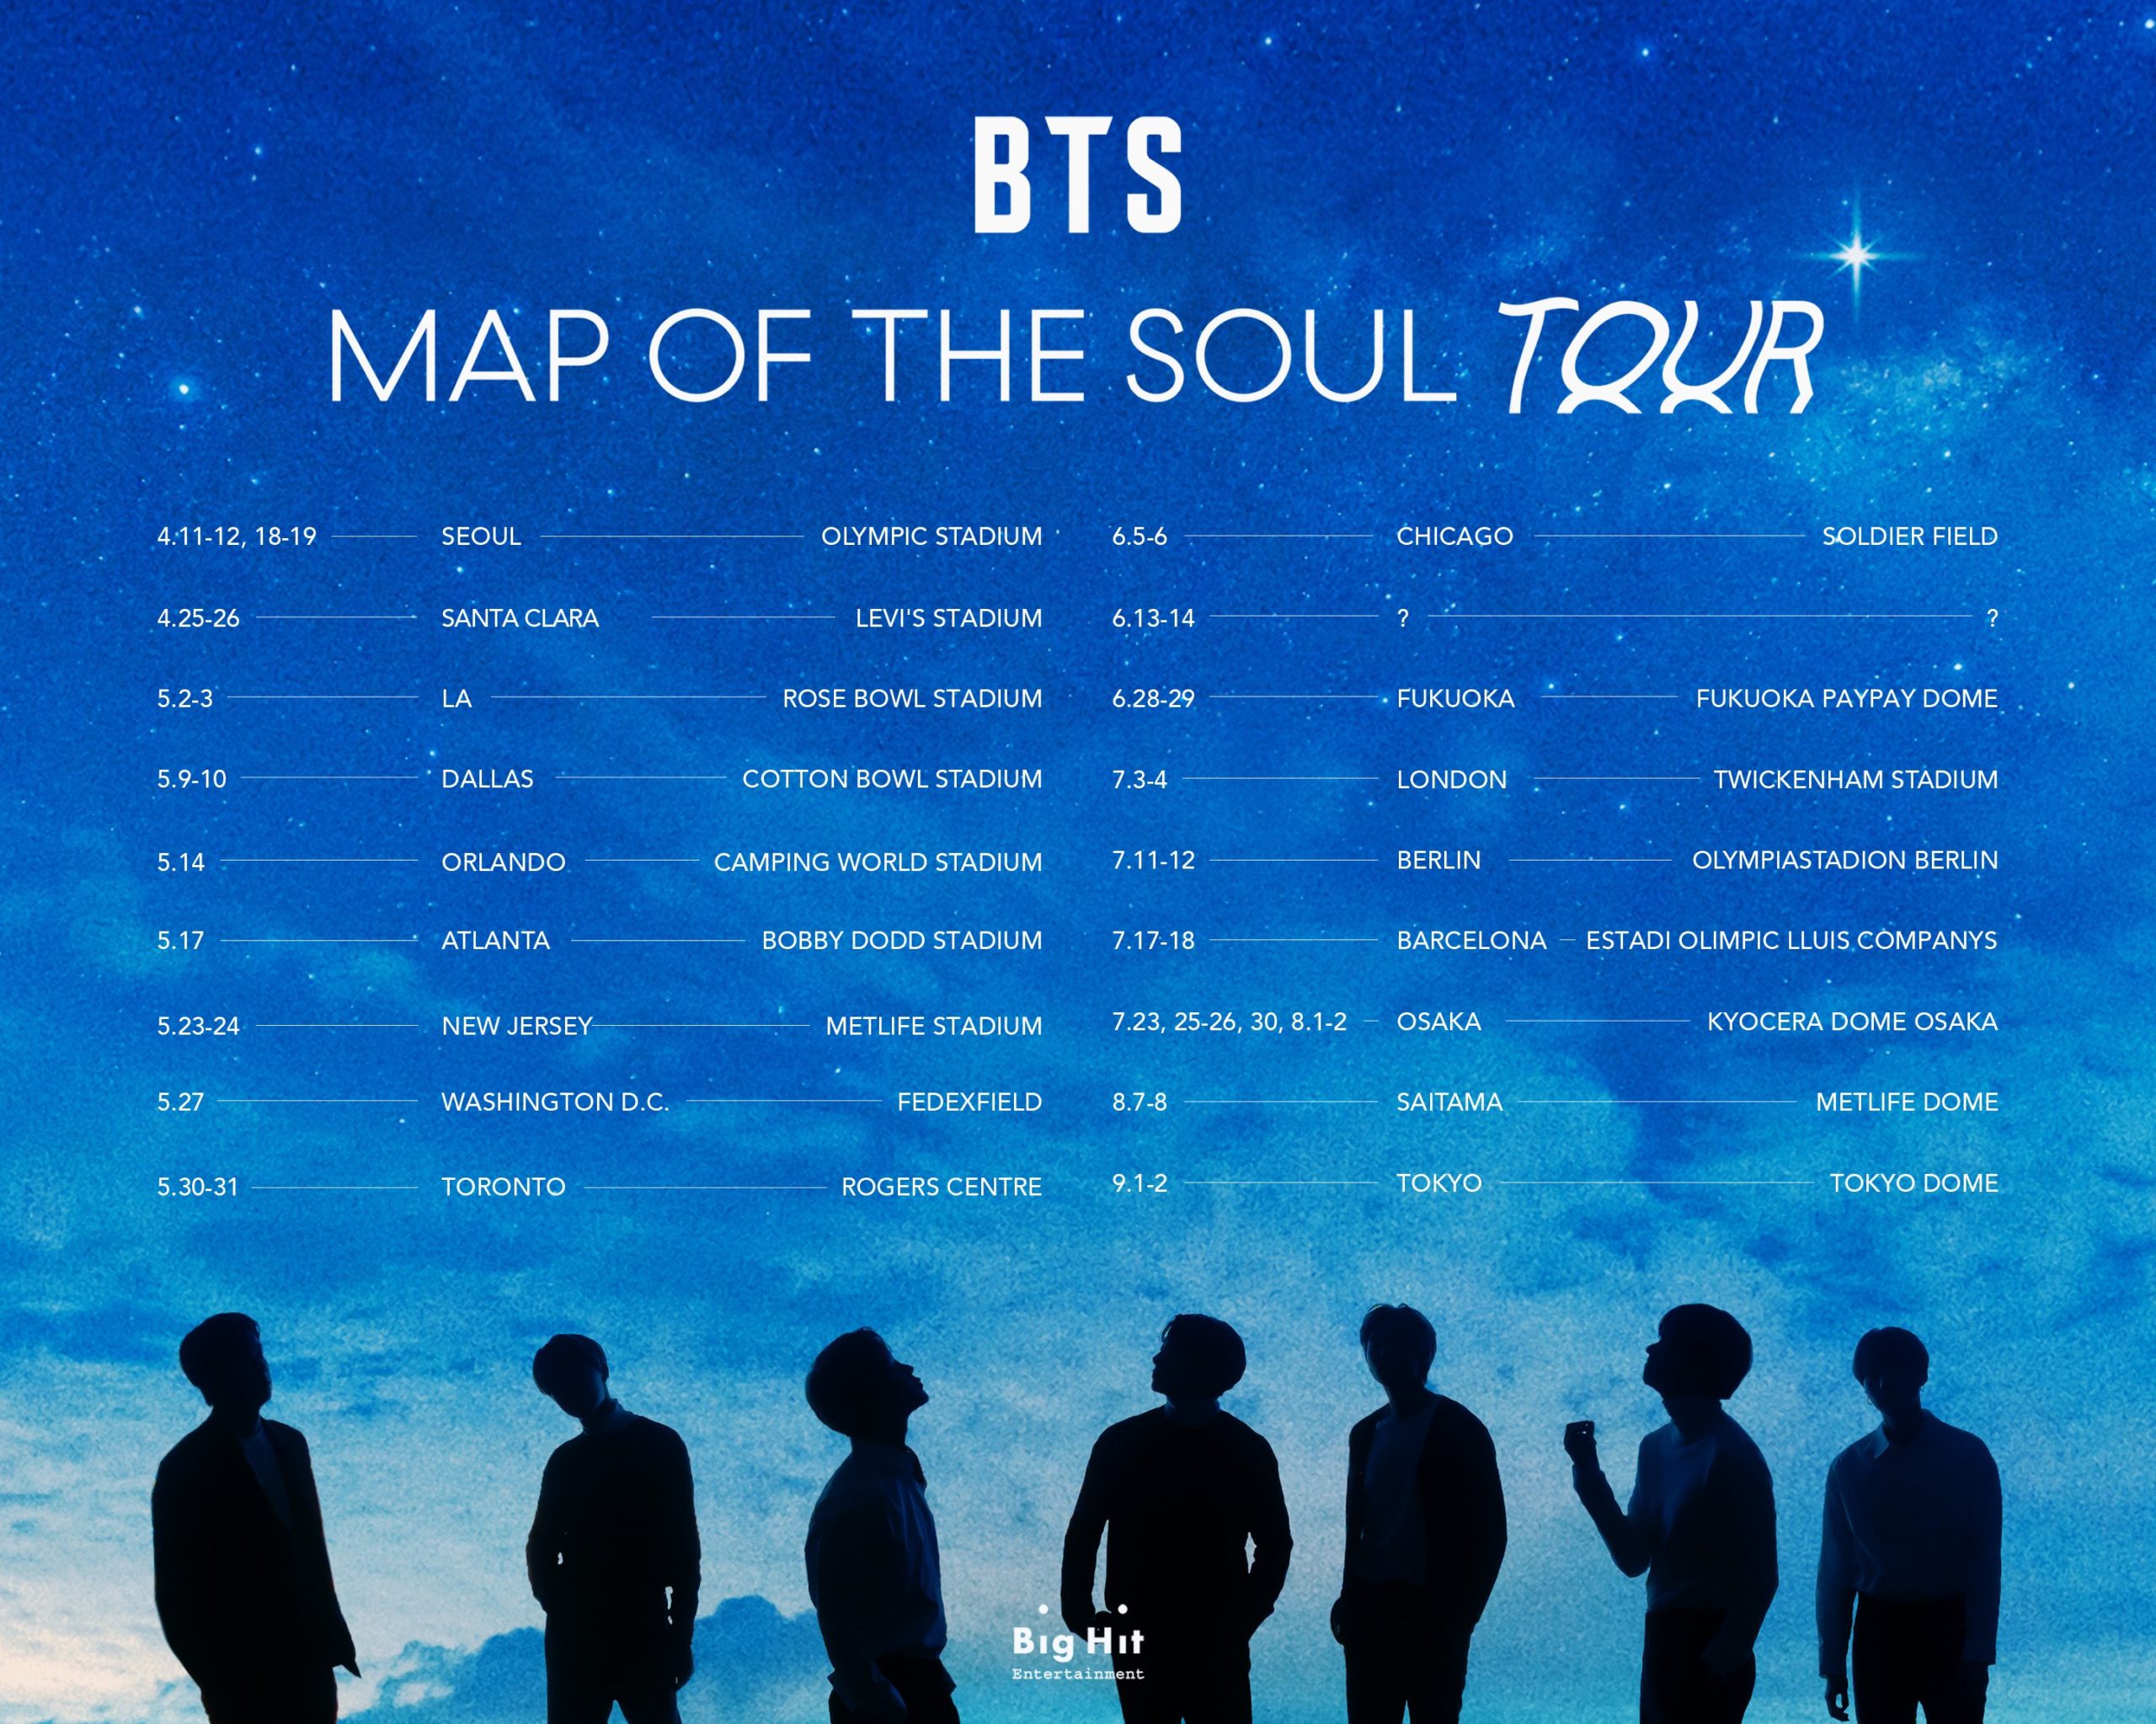 BTS Map Of The Soul Tour 2020: BTS Announces Dates and Locations of Their Upcoming ...2560 x 2047